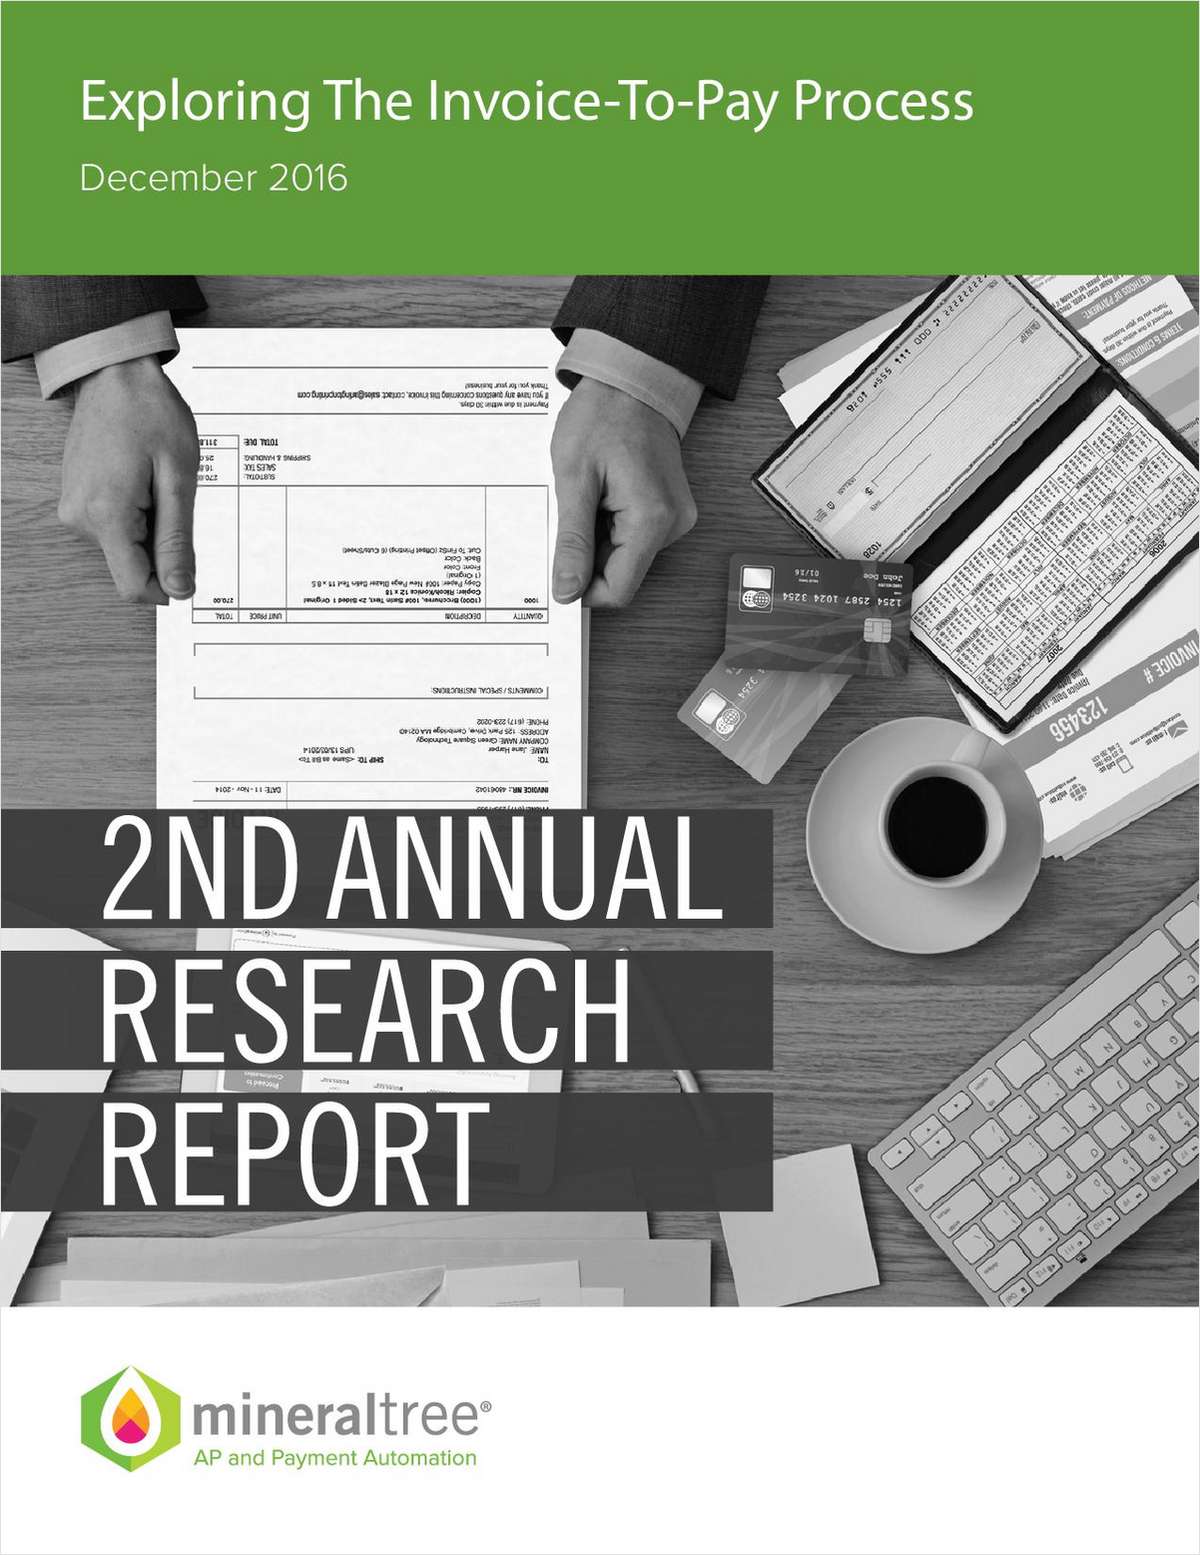 MineralTree Annual Research Brief - Exploring the Invoice-to-Pay Process